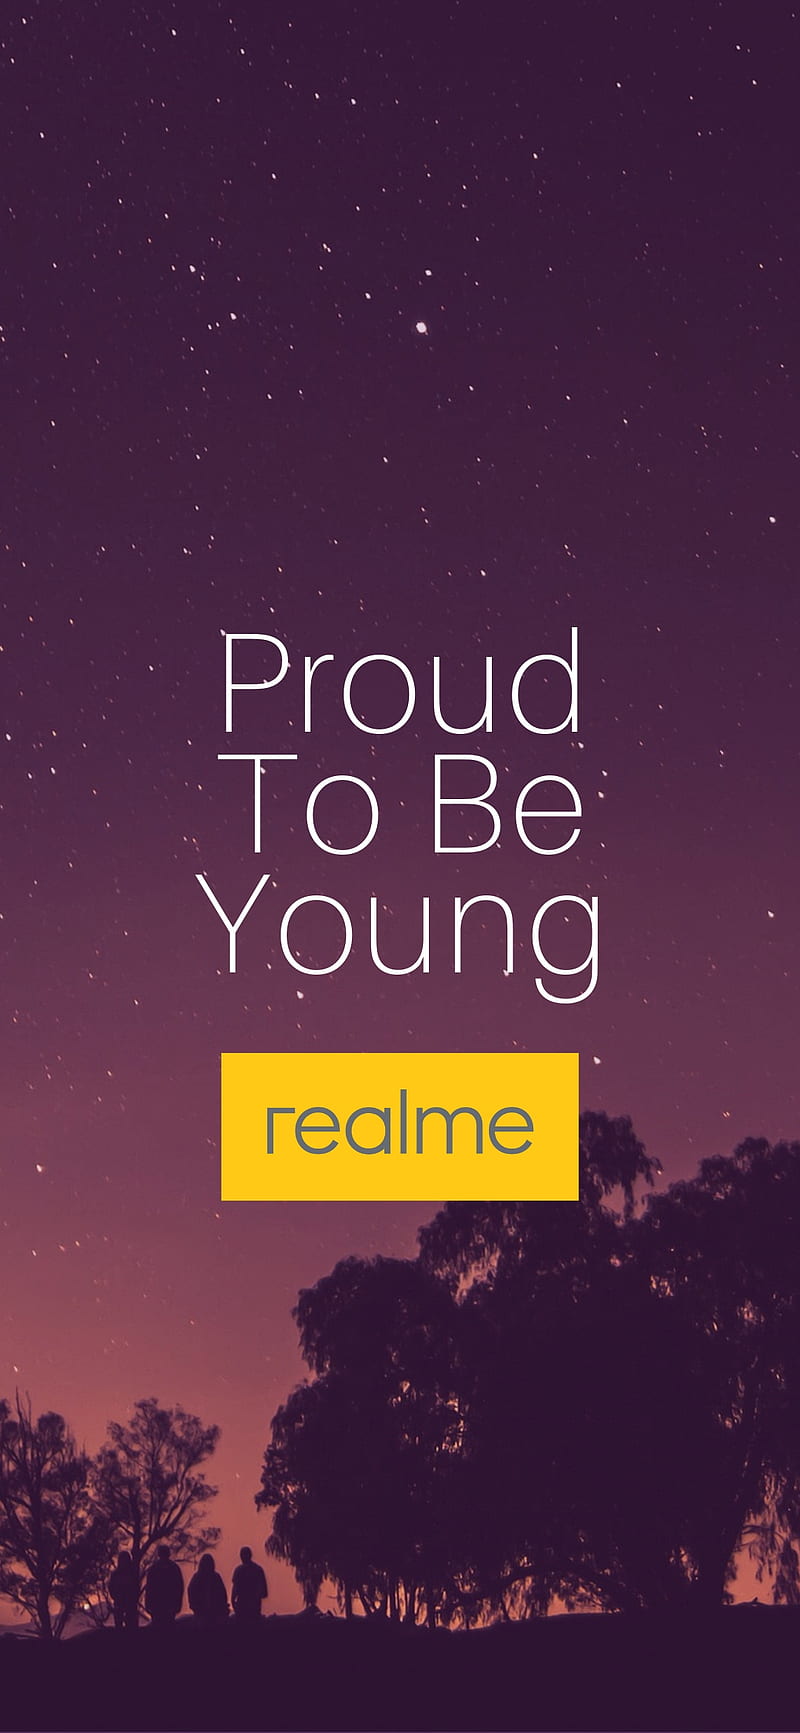 Proud To Be Young, live, lock, phone, proud, realme, realme 3 pro, screen, sign, strong, young, HD phone wallpaper